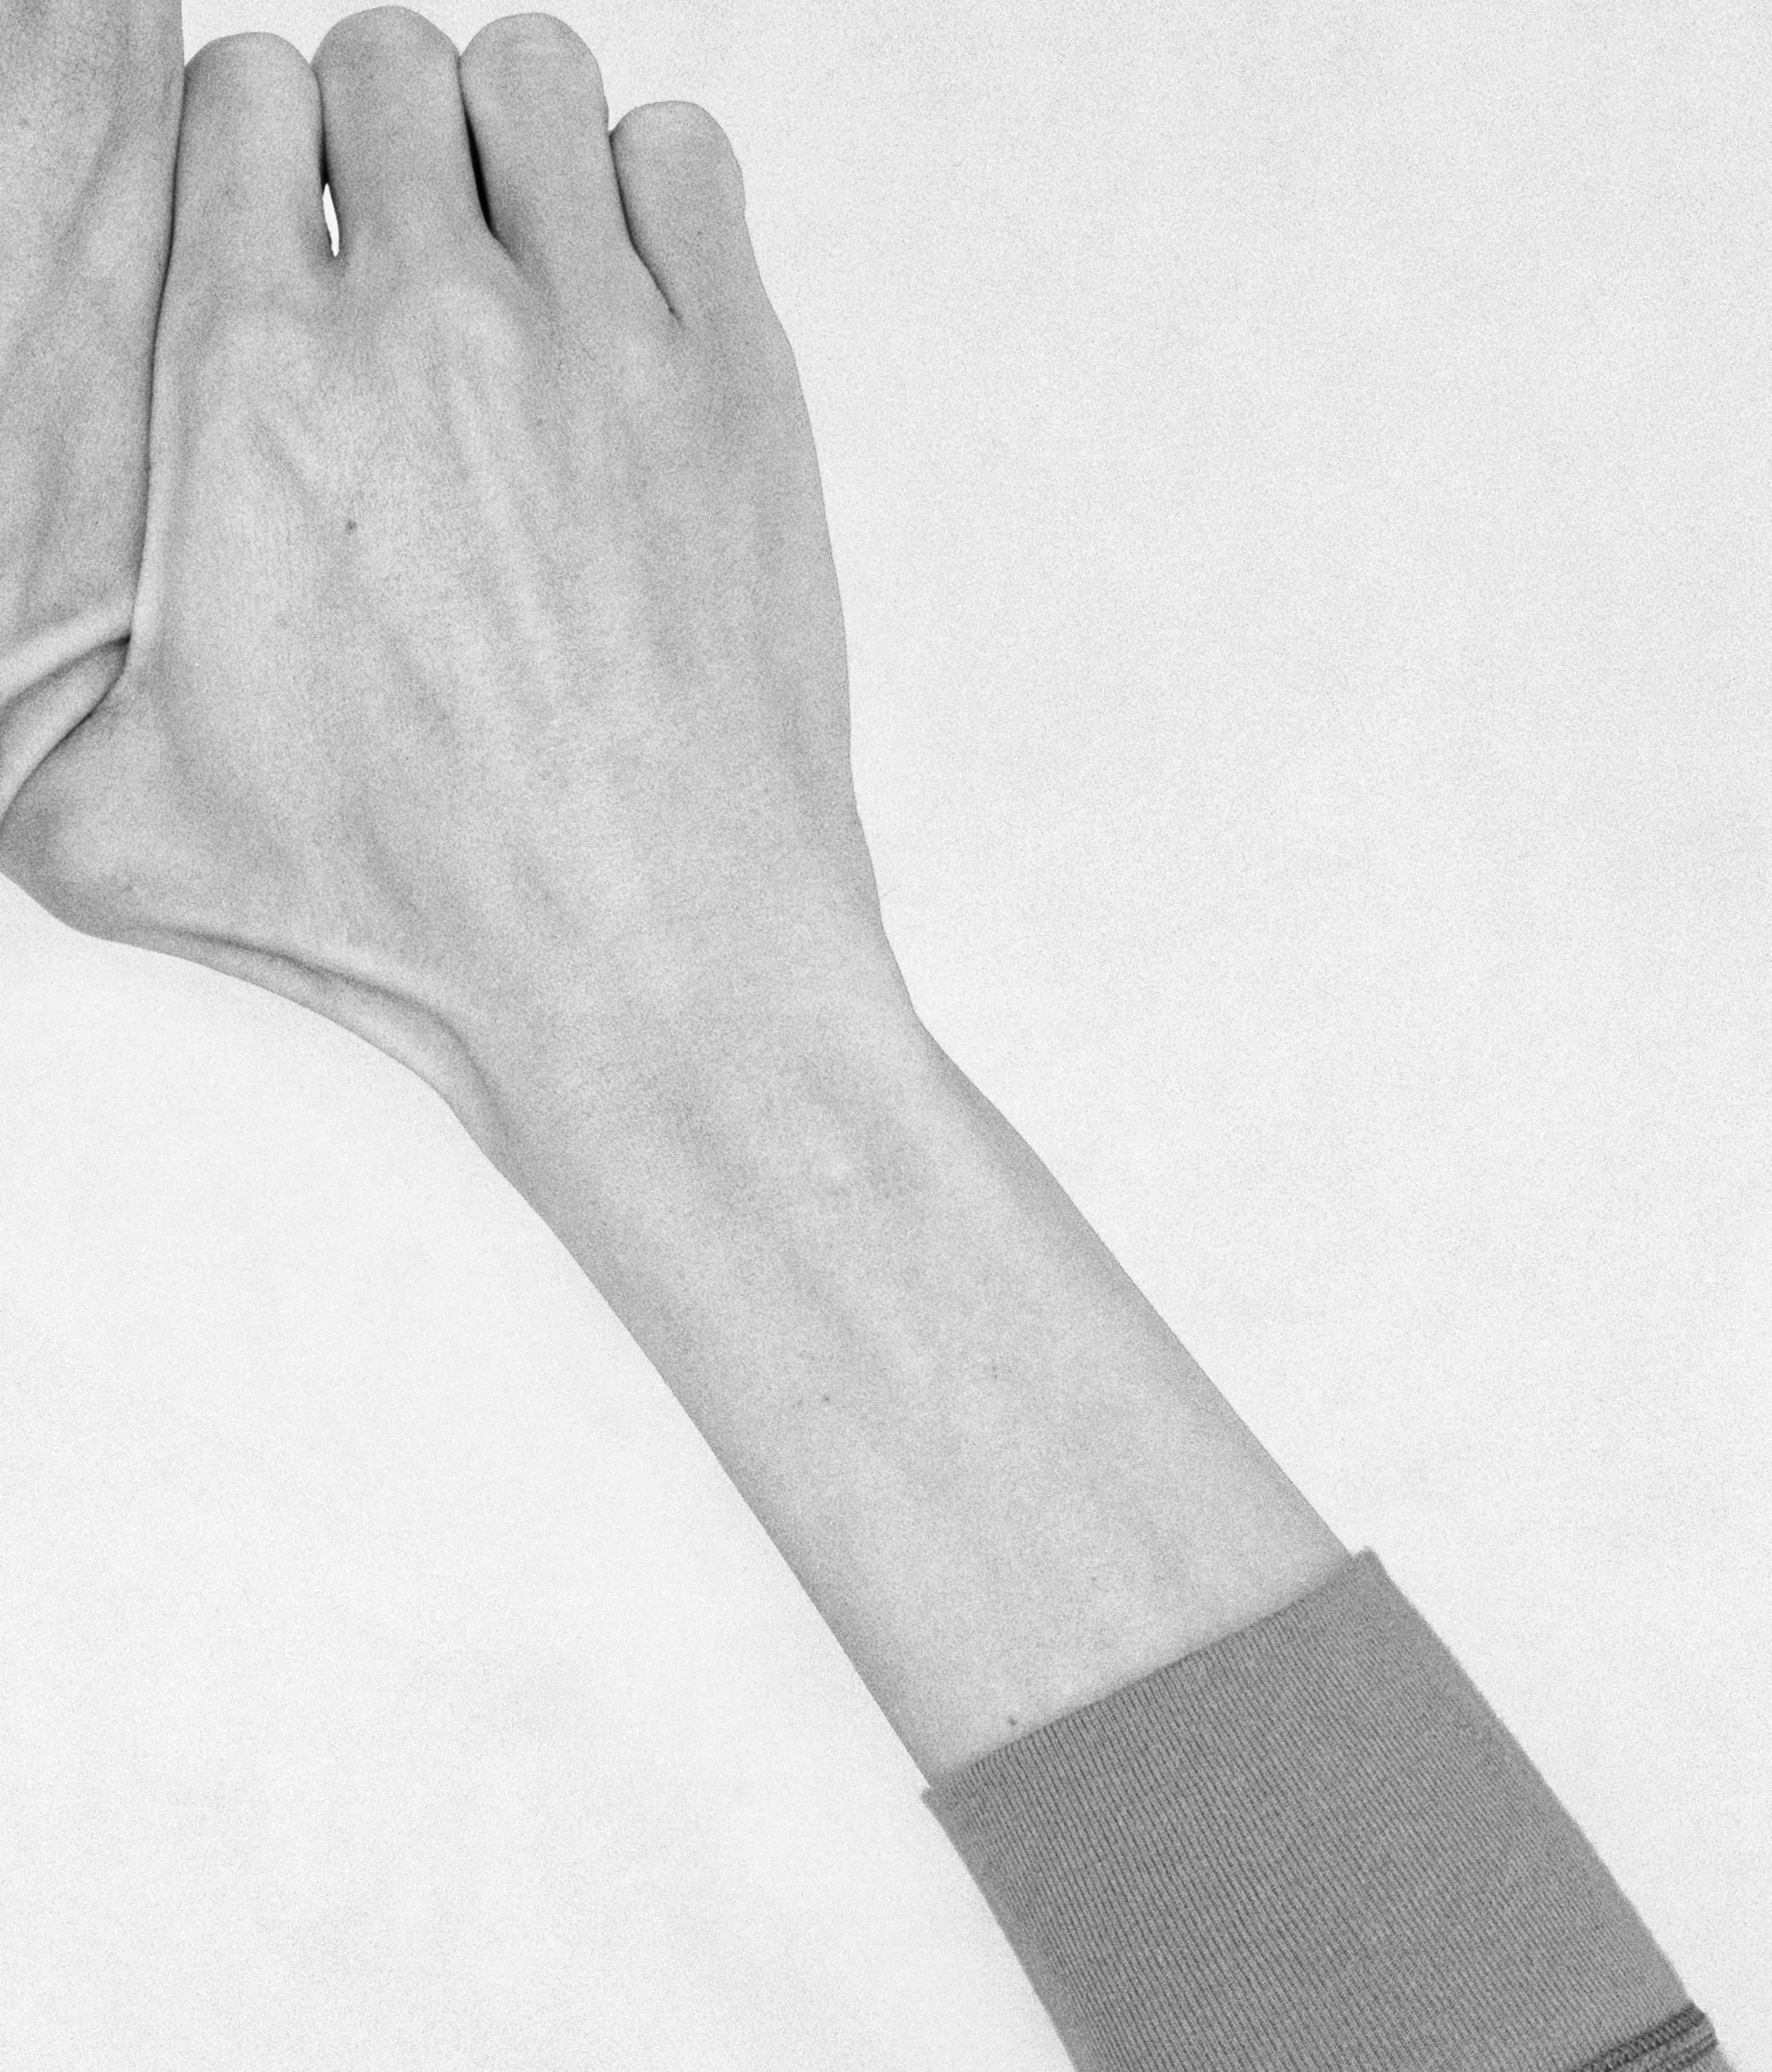 Untitled XXXVIII From the Series Chiromorphose. Hands. Black & White Photography For Sale 2